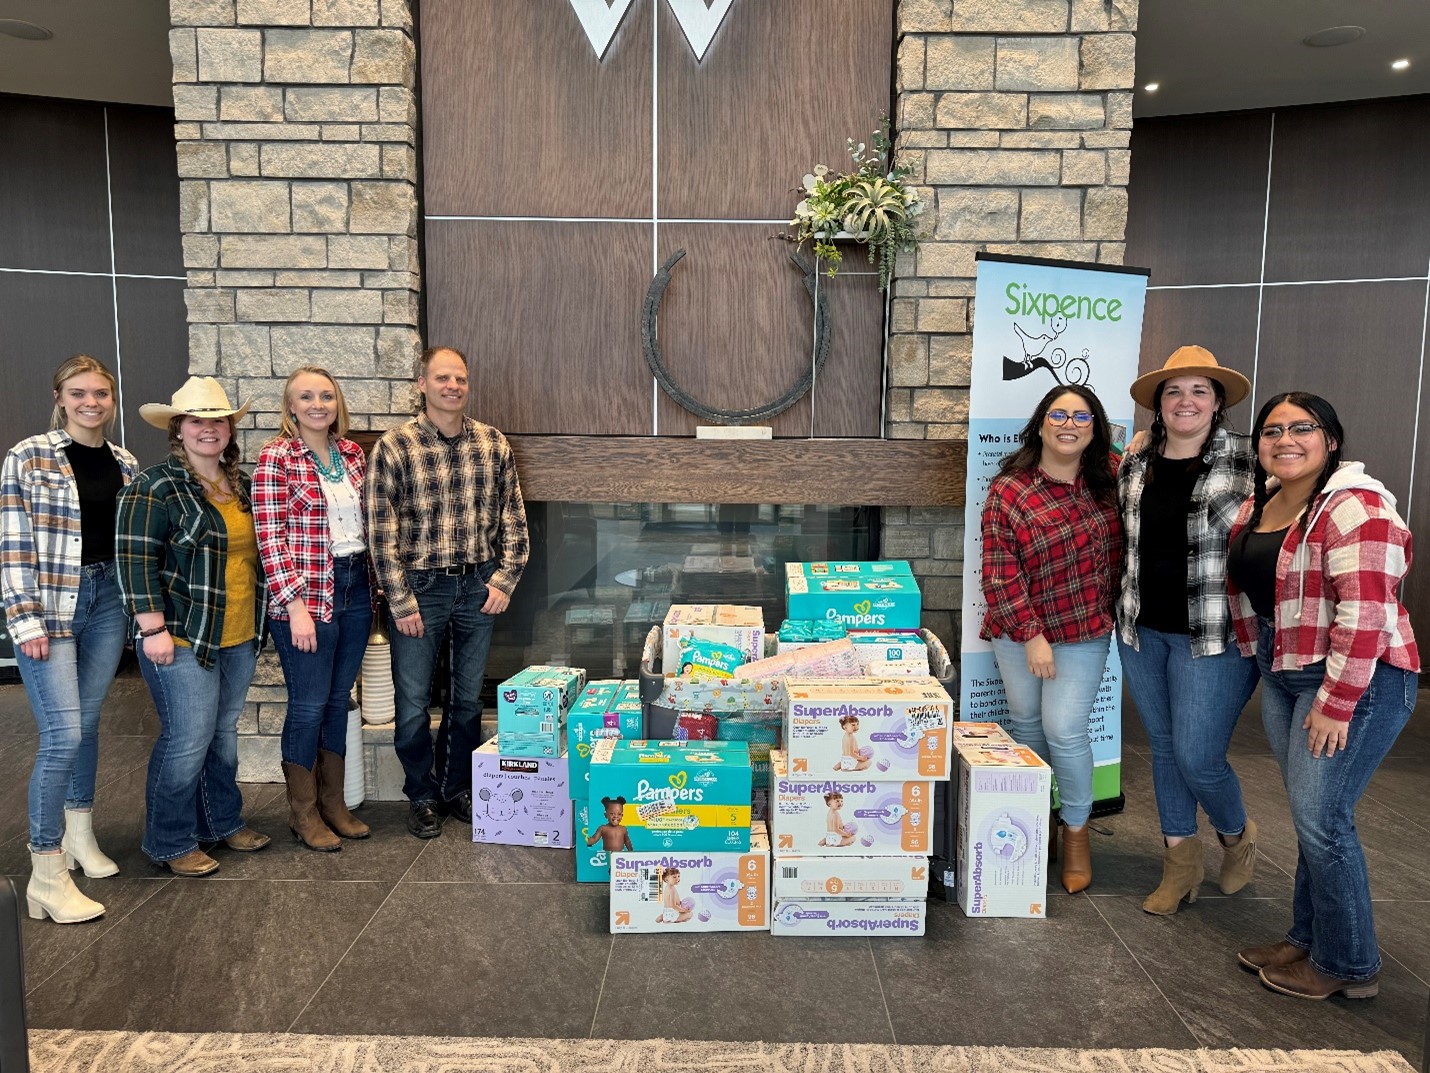 Norfolk branch hosts a diaper drive with Sixpence.